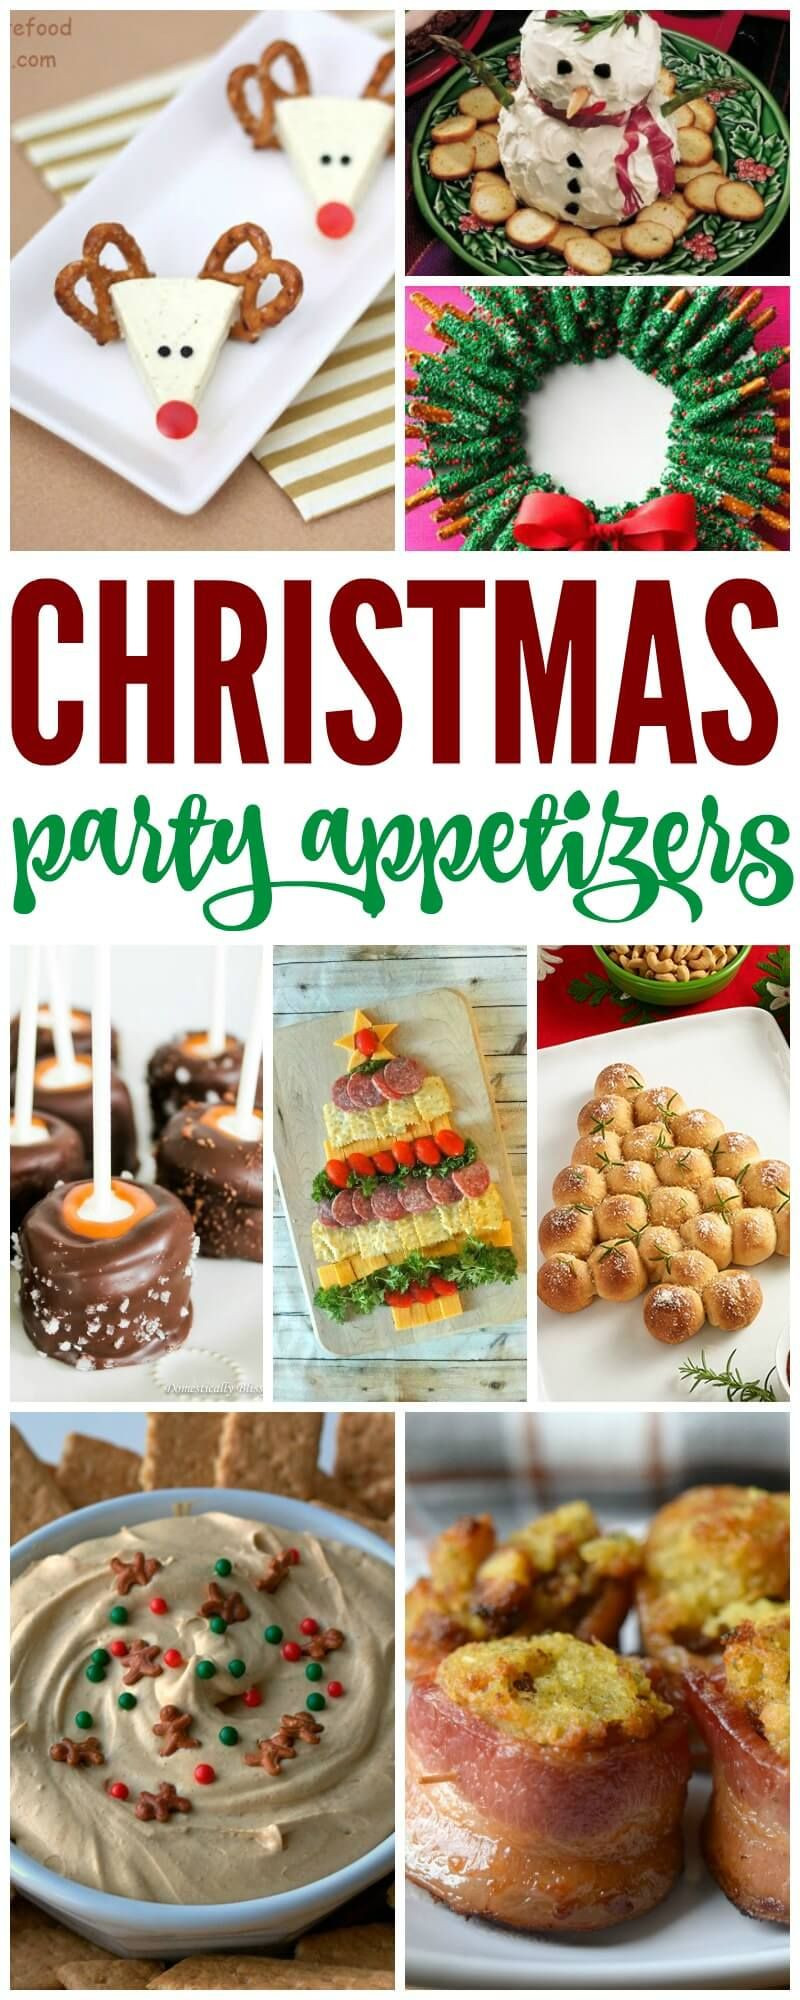 Christmas Party Appetizers Pinterest
 Here are 20 Simple Christmas Party Appetizers for you If